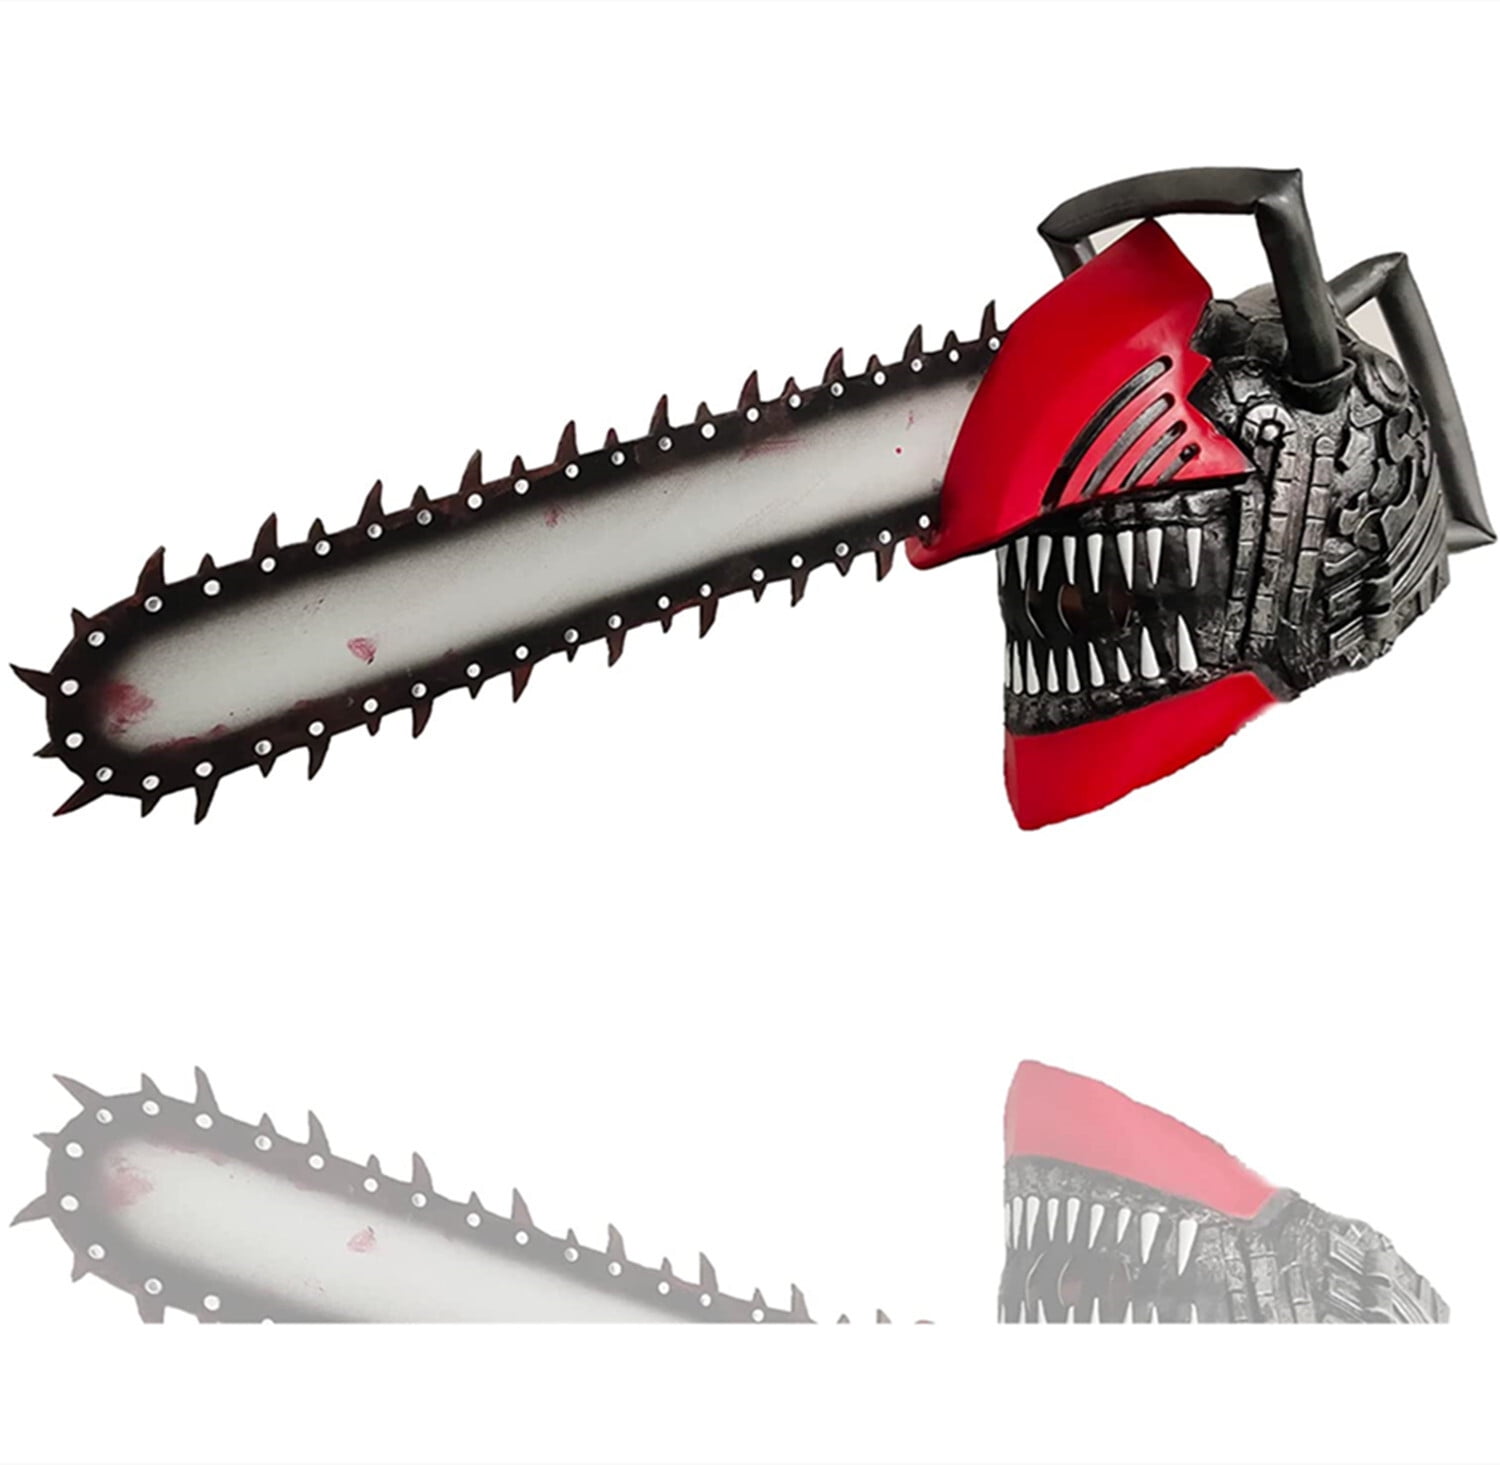 Buy Chainsaw Man cosplay Helmet and Saws Online for 150 